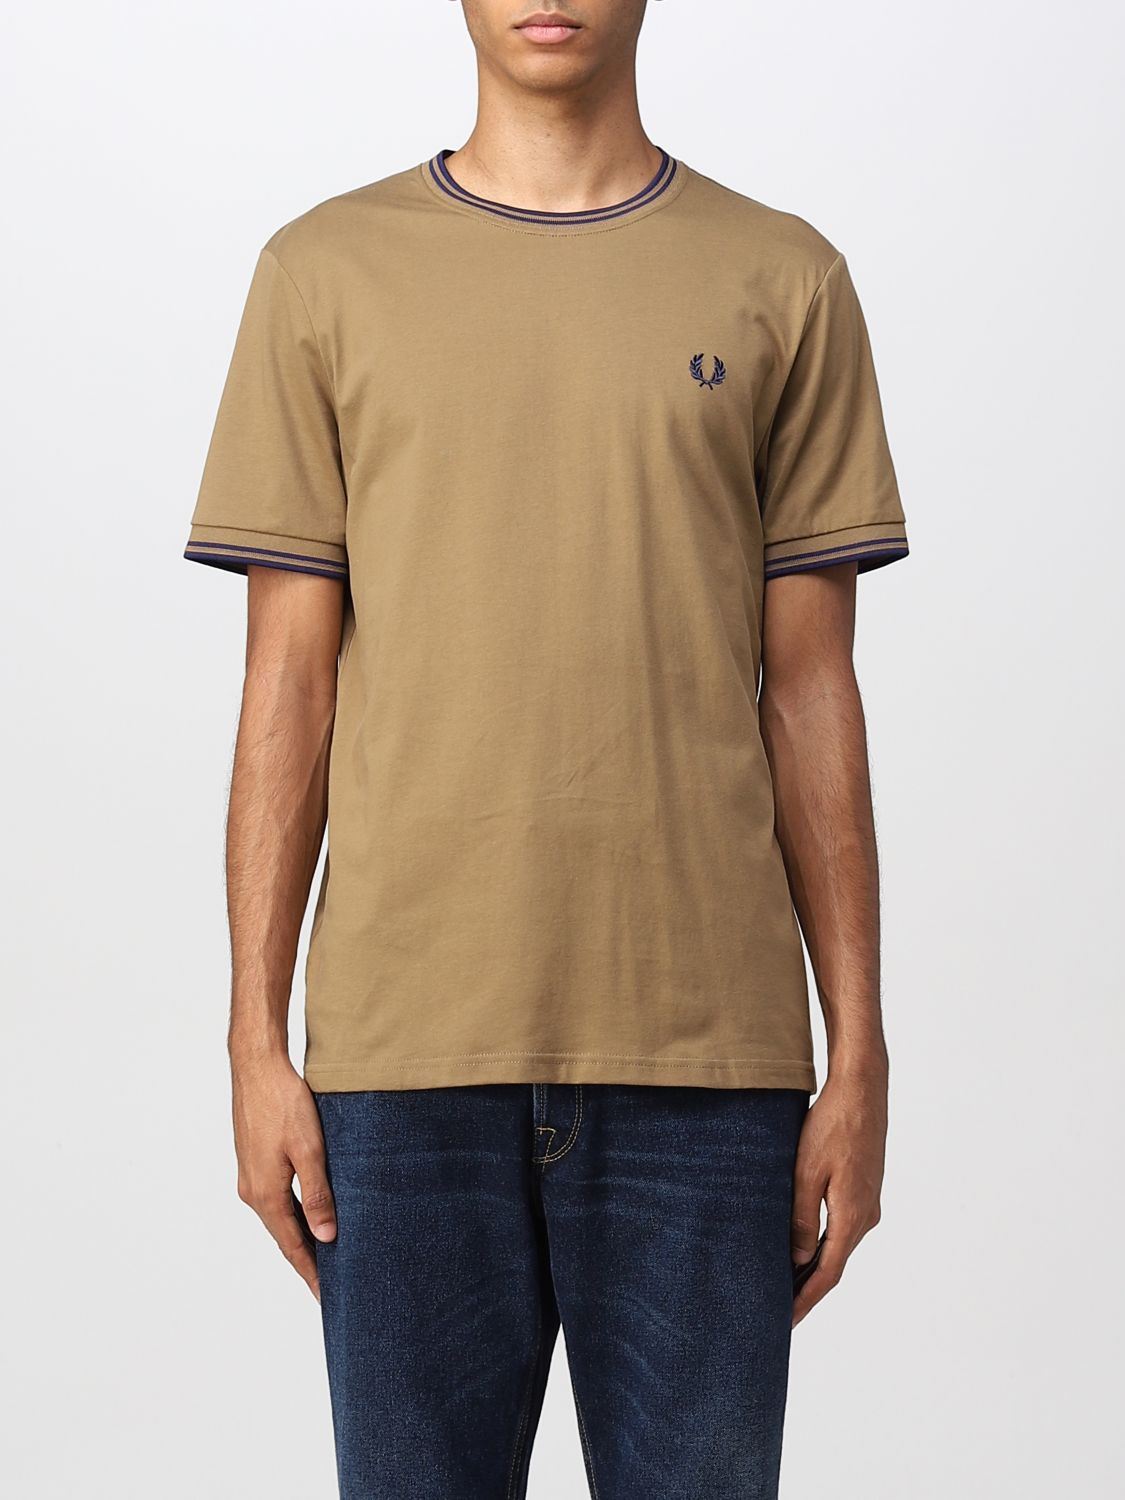 T-shirt Fred Perry: T-shirt Fred Perry con mini logo ricamato marrone 1